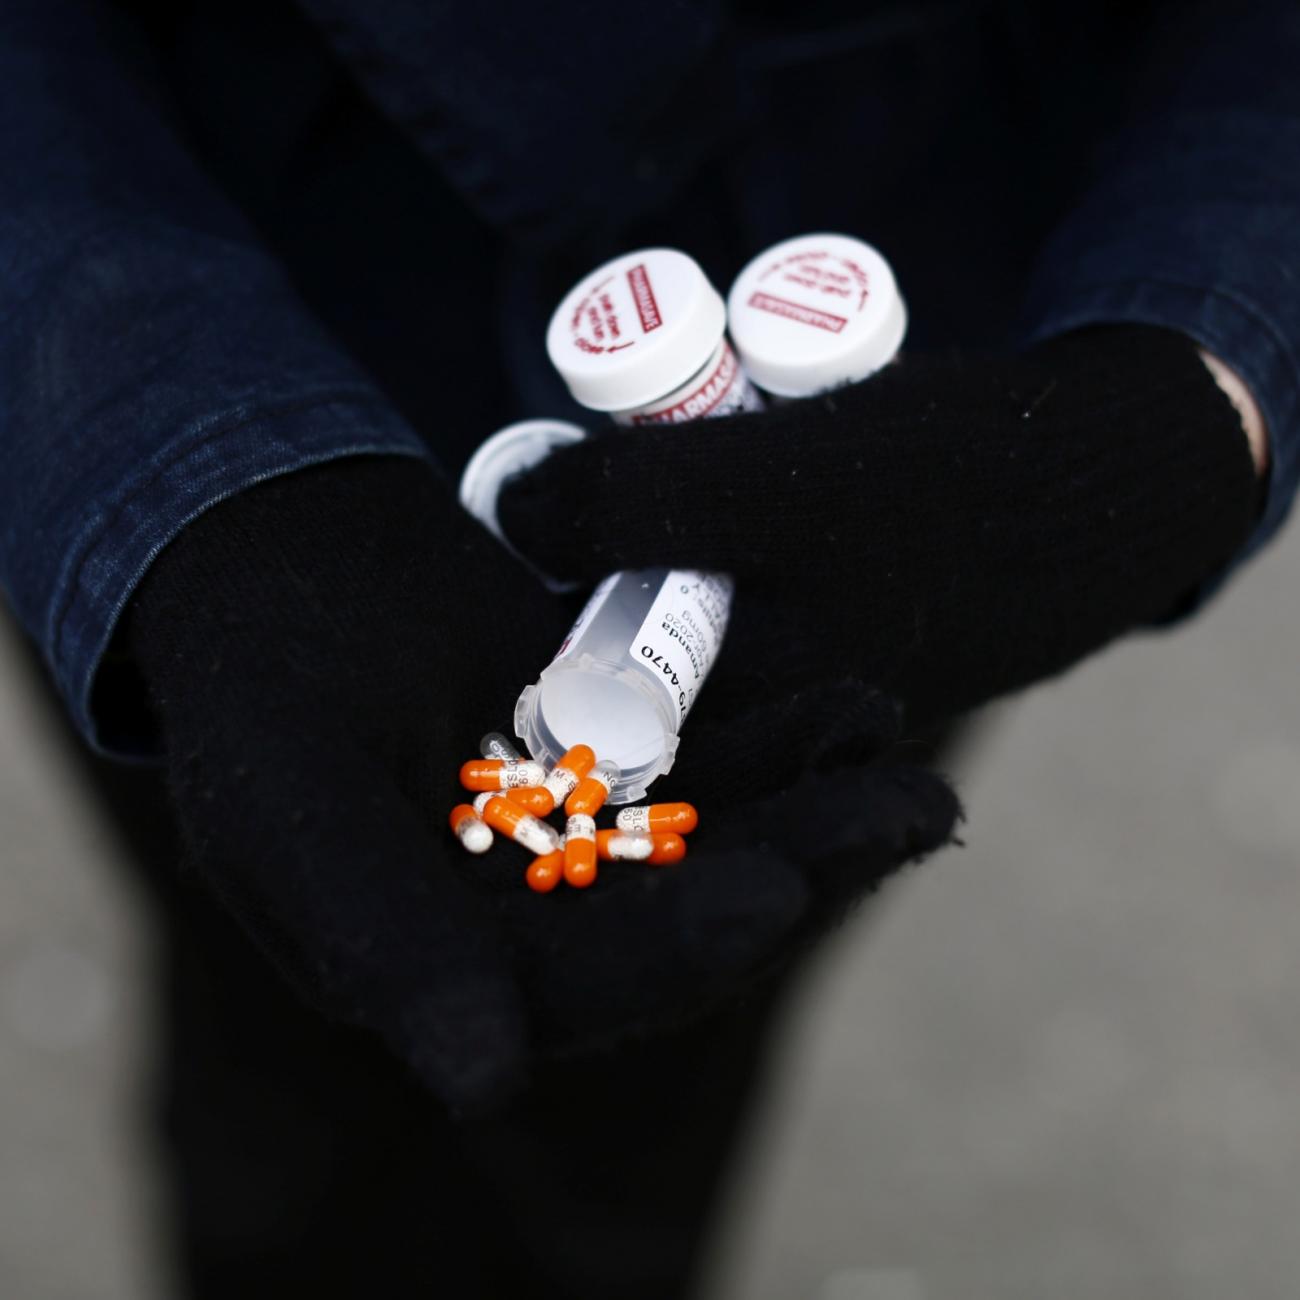 A fentanyl user displays a "safe supply" of opioid alternatives in Vancouver, Canada